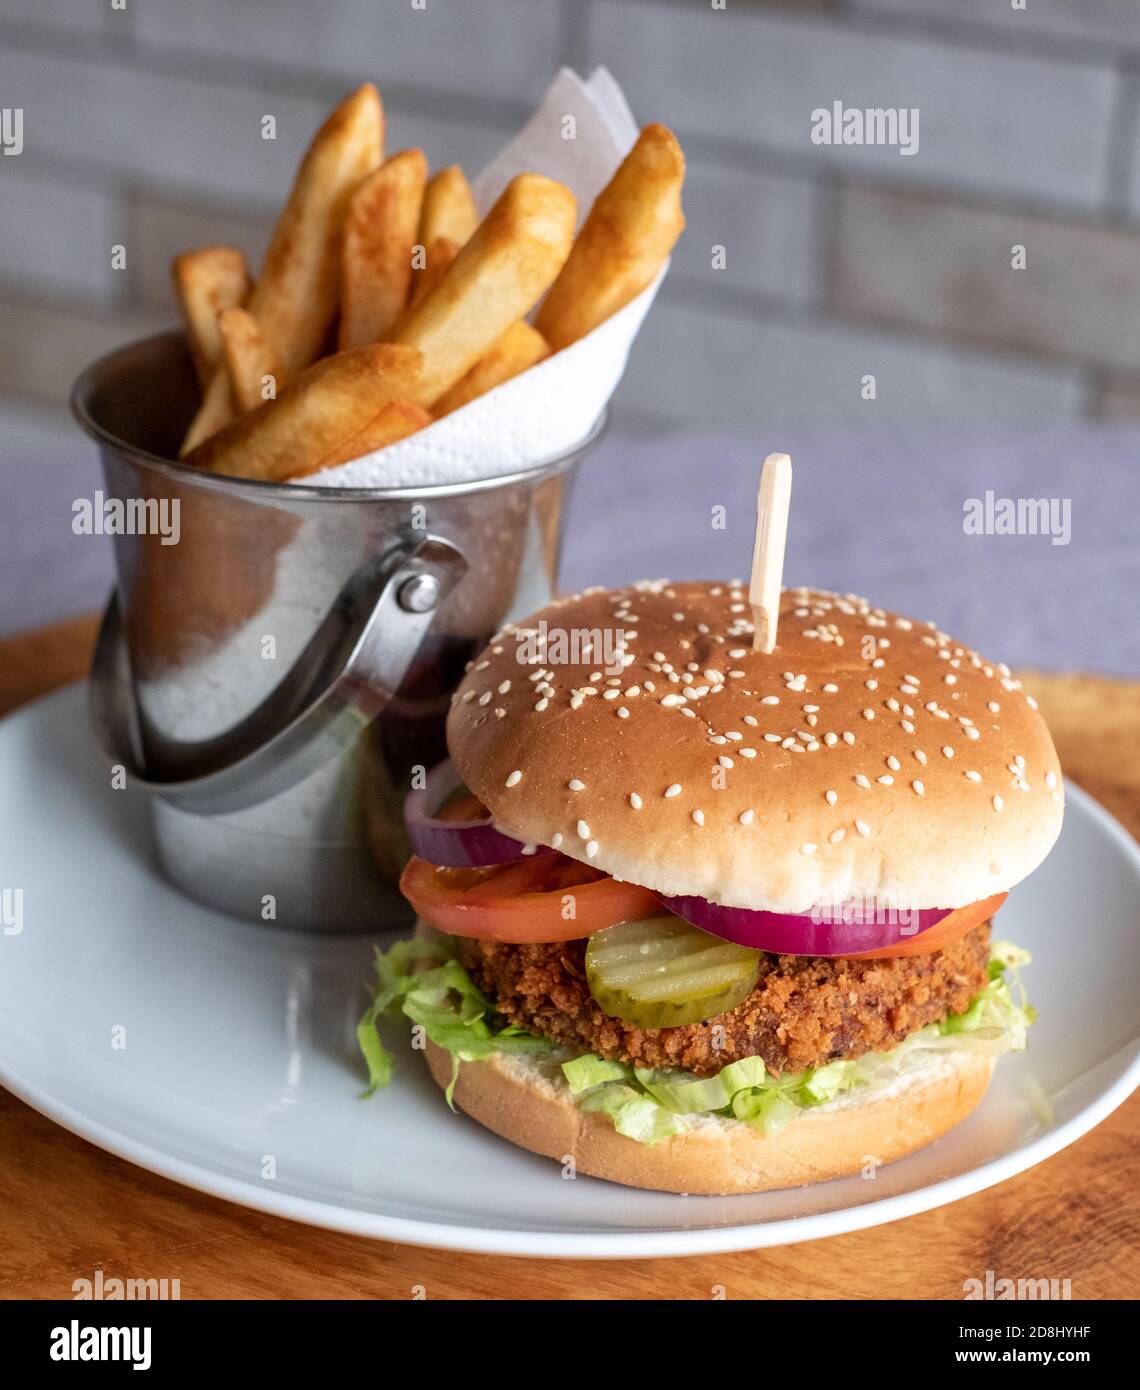 Vegan veggie soya burger in bun with salad and relish, and chips on the side. Stock Photo